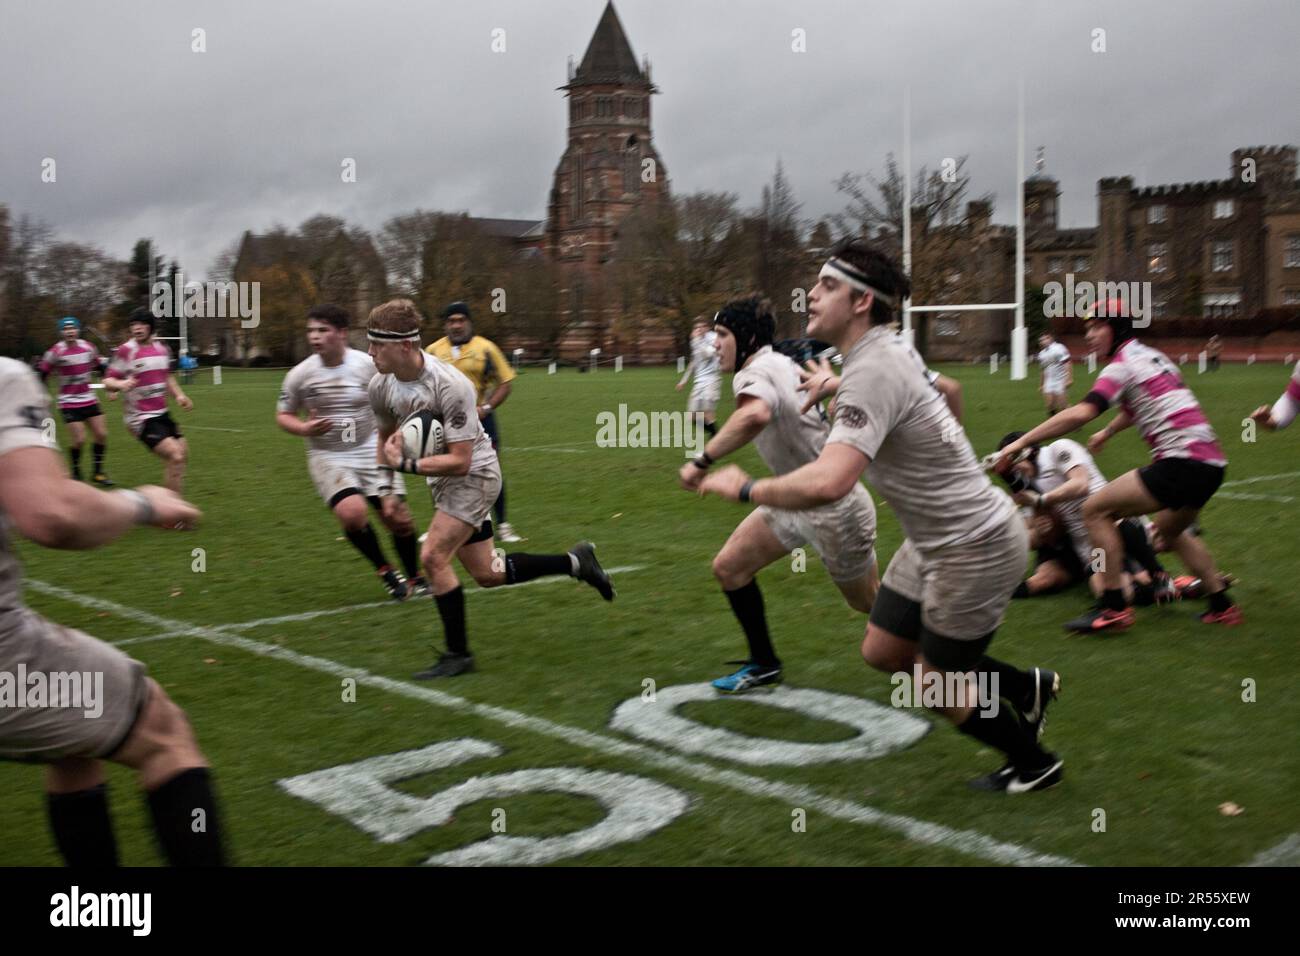 A rugby match played at